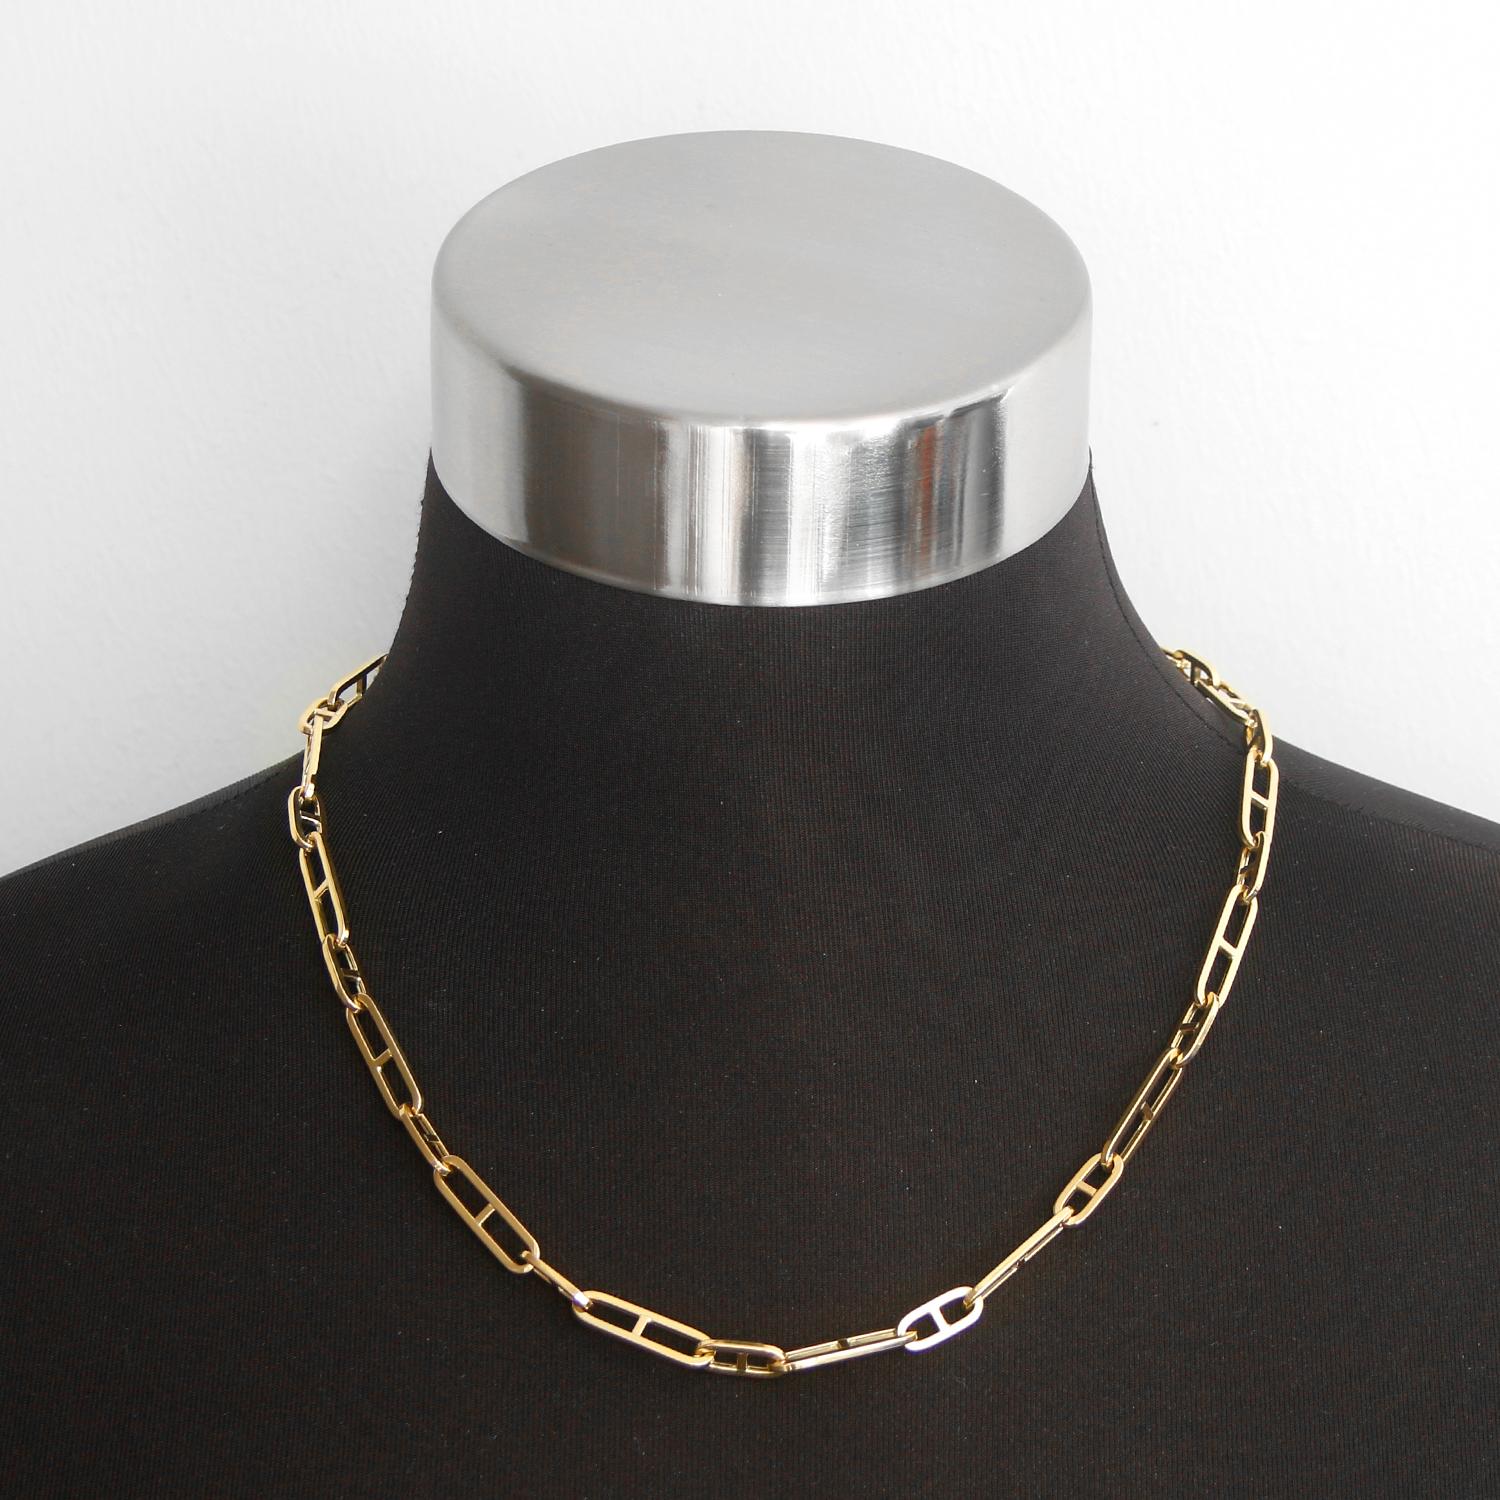 14K Yellow Gold Mariner Link with Bar Chain Necklace 20 Inches - 14K Yellow gold hollow mariner link with bar necklace. Length size 20 inches. Can be sized down.  Perfect for layering or worn alone. Total weight 14.70 grams.